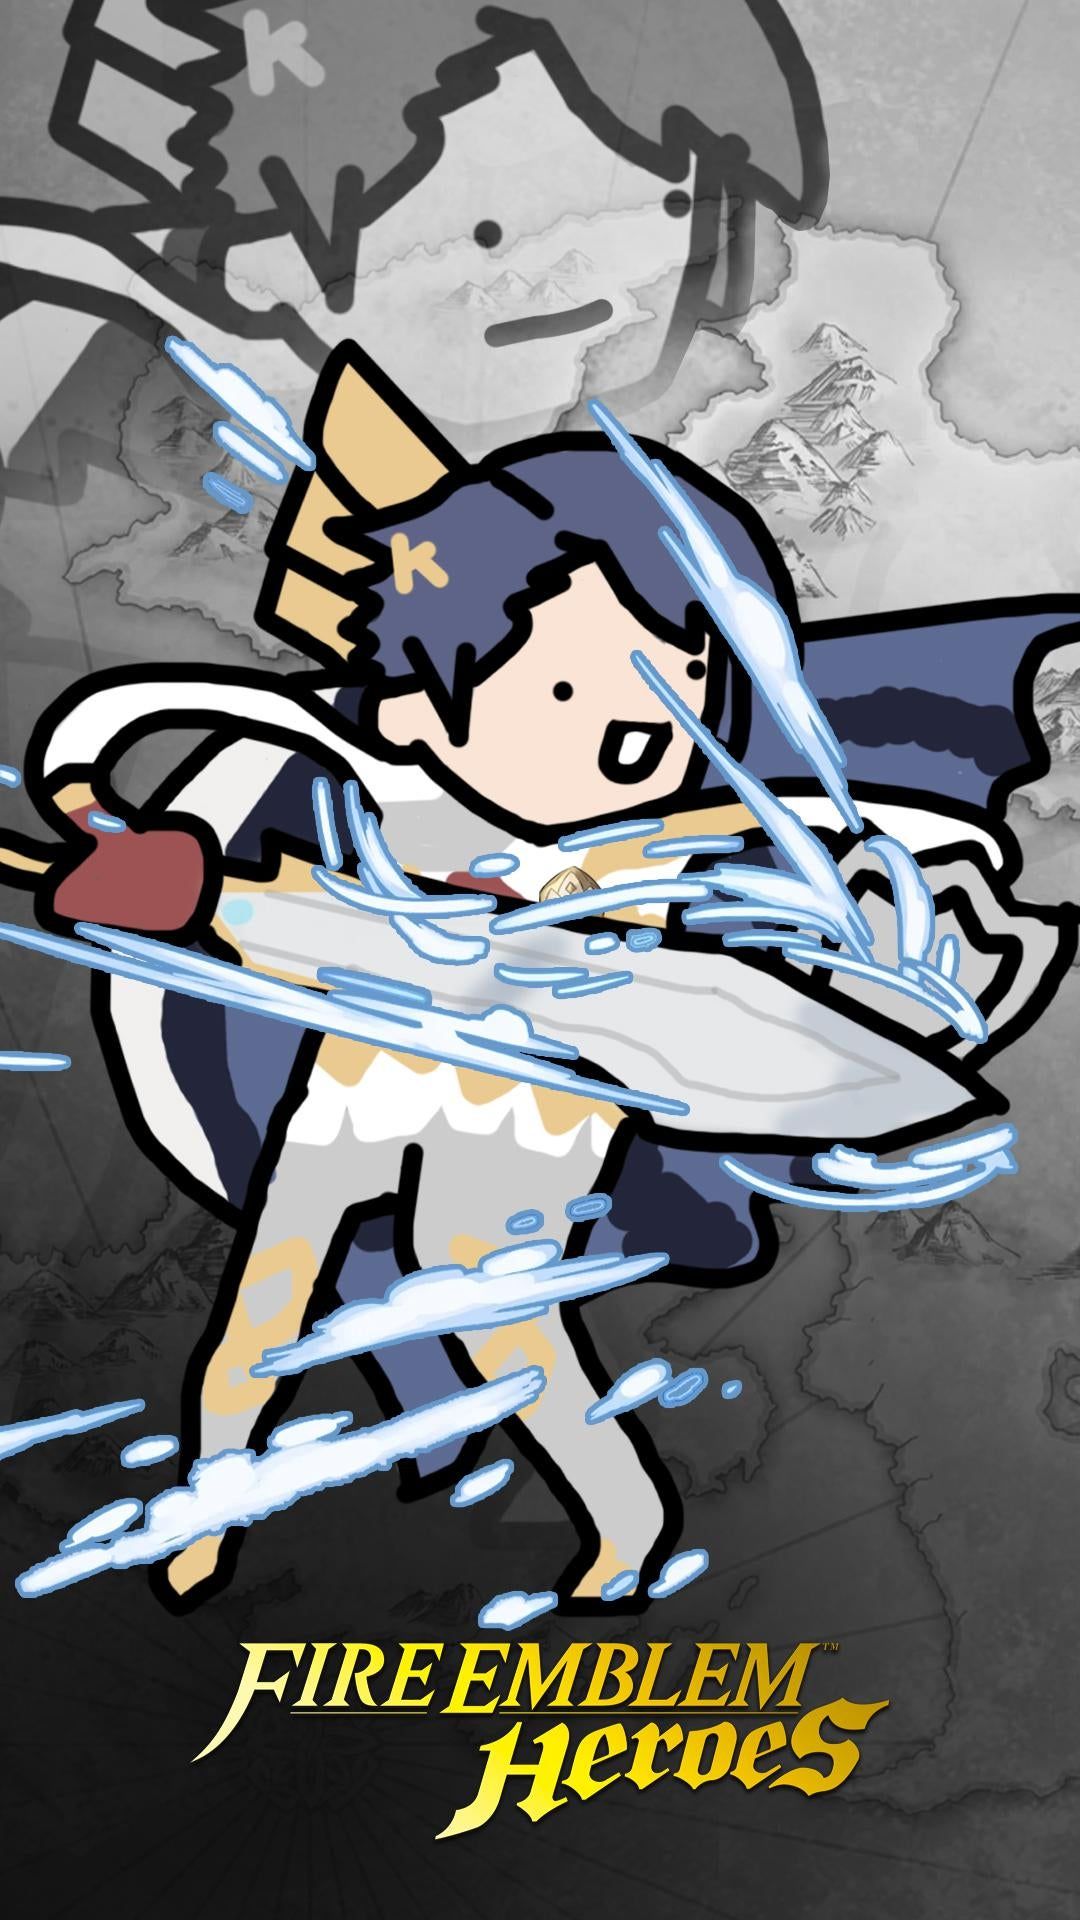 I have acquired the Alfonse Hero Rises 2020 wallpaper from a contact